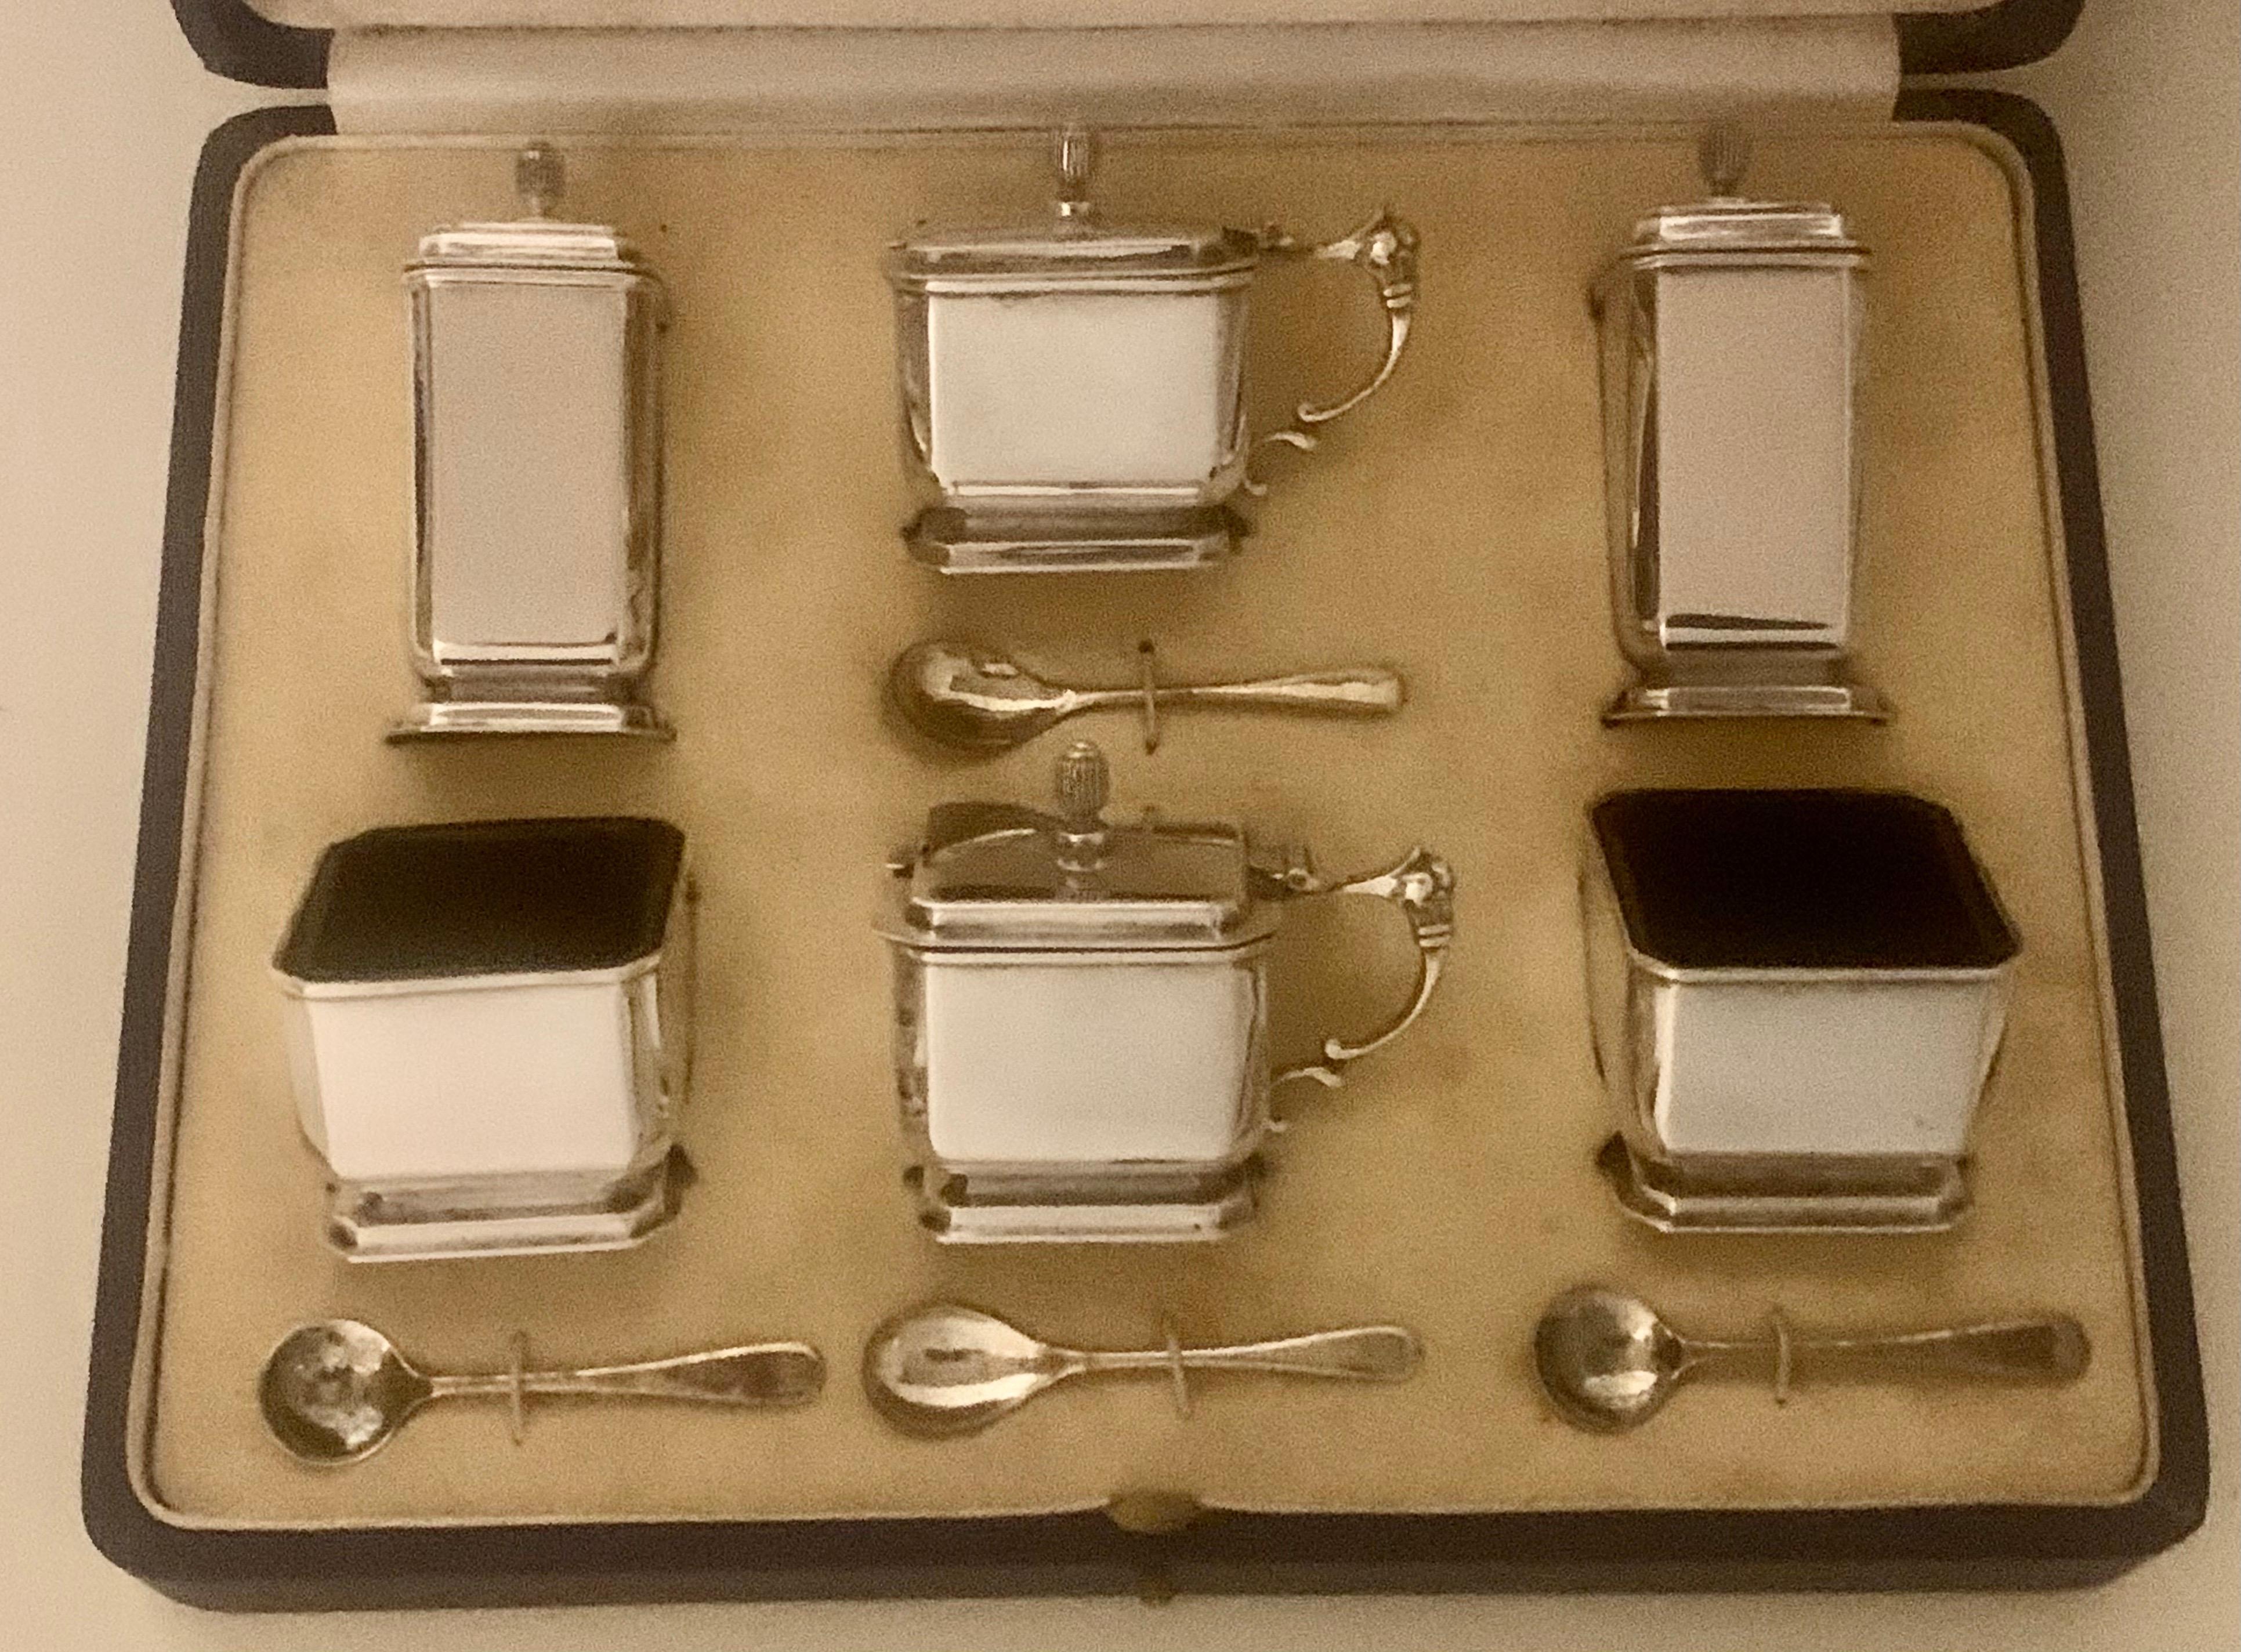 A very stylish sterling silver Art Deco six piece condiment service, having octagonal Tapered-sided bodies, with original blue-glass liners, pull-off lids on the peppers, hinged lids on the mustards, and all in their original beige velvet and cream